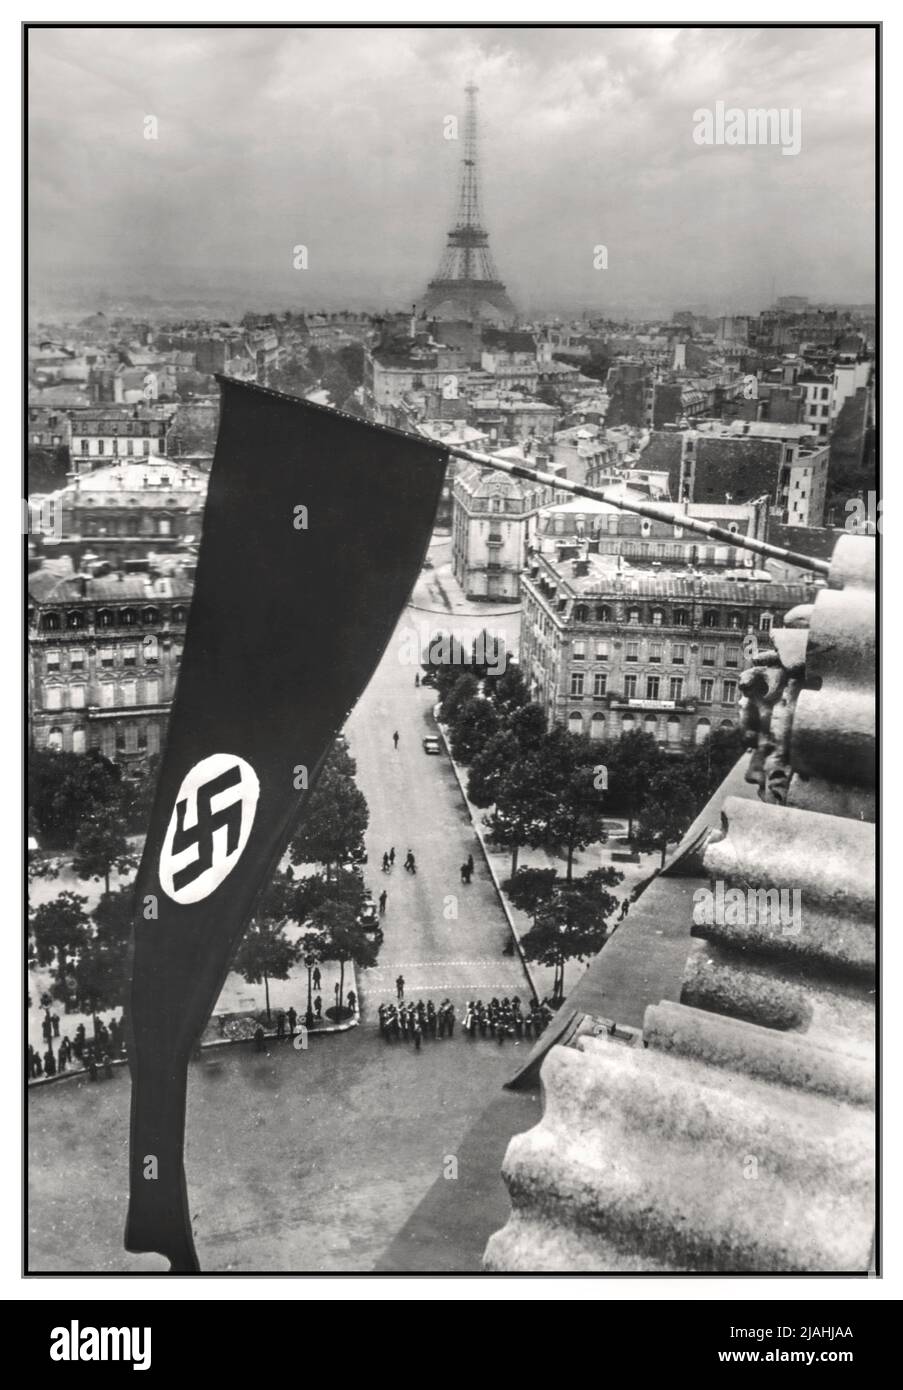 PARIS WW2 Nazi occupation Paris France with large banner Swastika flying over Paris with Eiffel Tower behind Paris France  June 1940 Paris started mobilizing for war in September 1939, when Nazi Germany and the Soviet Union attacked Poland, but May 10, 1940, the Germans attacked France and quickly defeated the French army. The French government departed Paris on June 10, and the Germans occupied the city on June 14. During the Occupation, the French Government moved to Vichy, and Paris was governed by the Nazi German military and by French officials approved by the Germans. Stock Photo